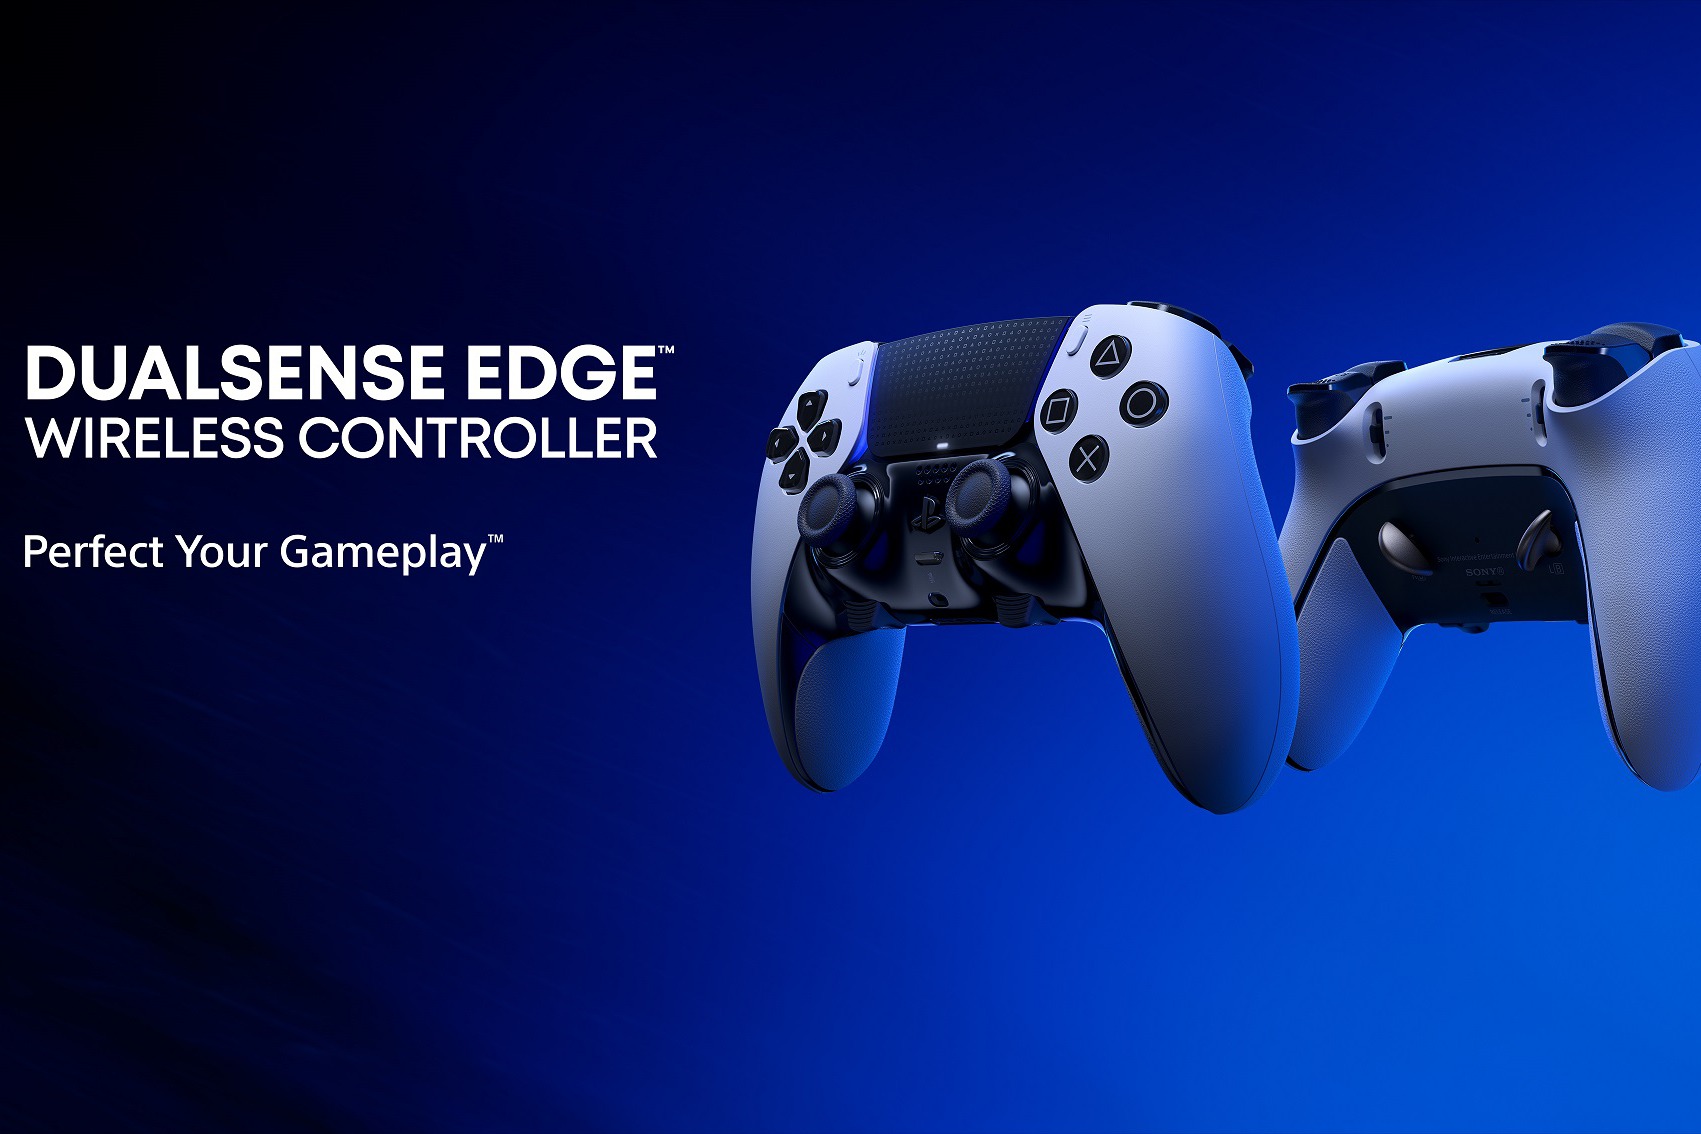 Players disassembled and found that the advanced version of the PS5 controller DualSense Edge has a smaller battery than the basic version of the controller – yqqlm